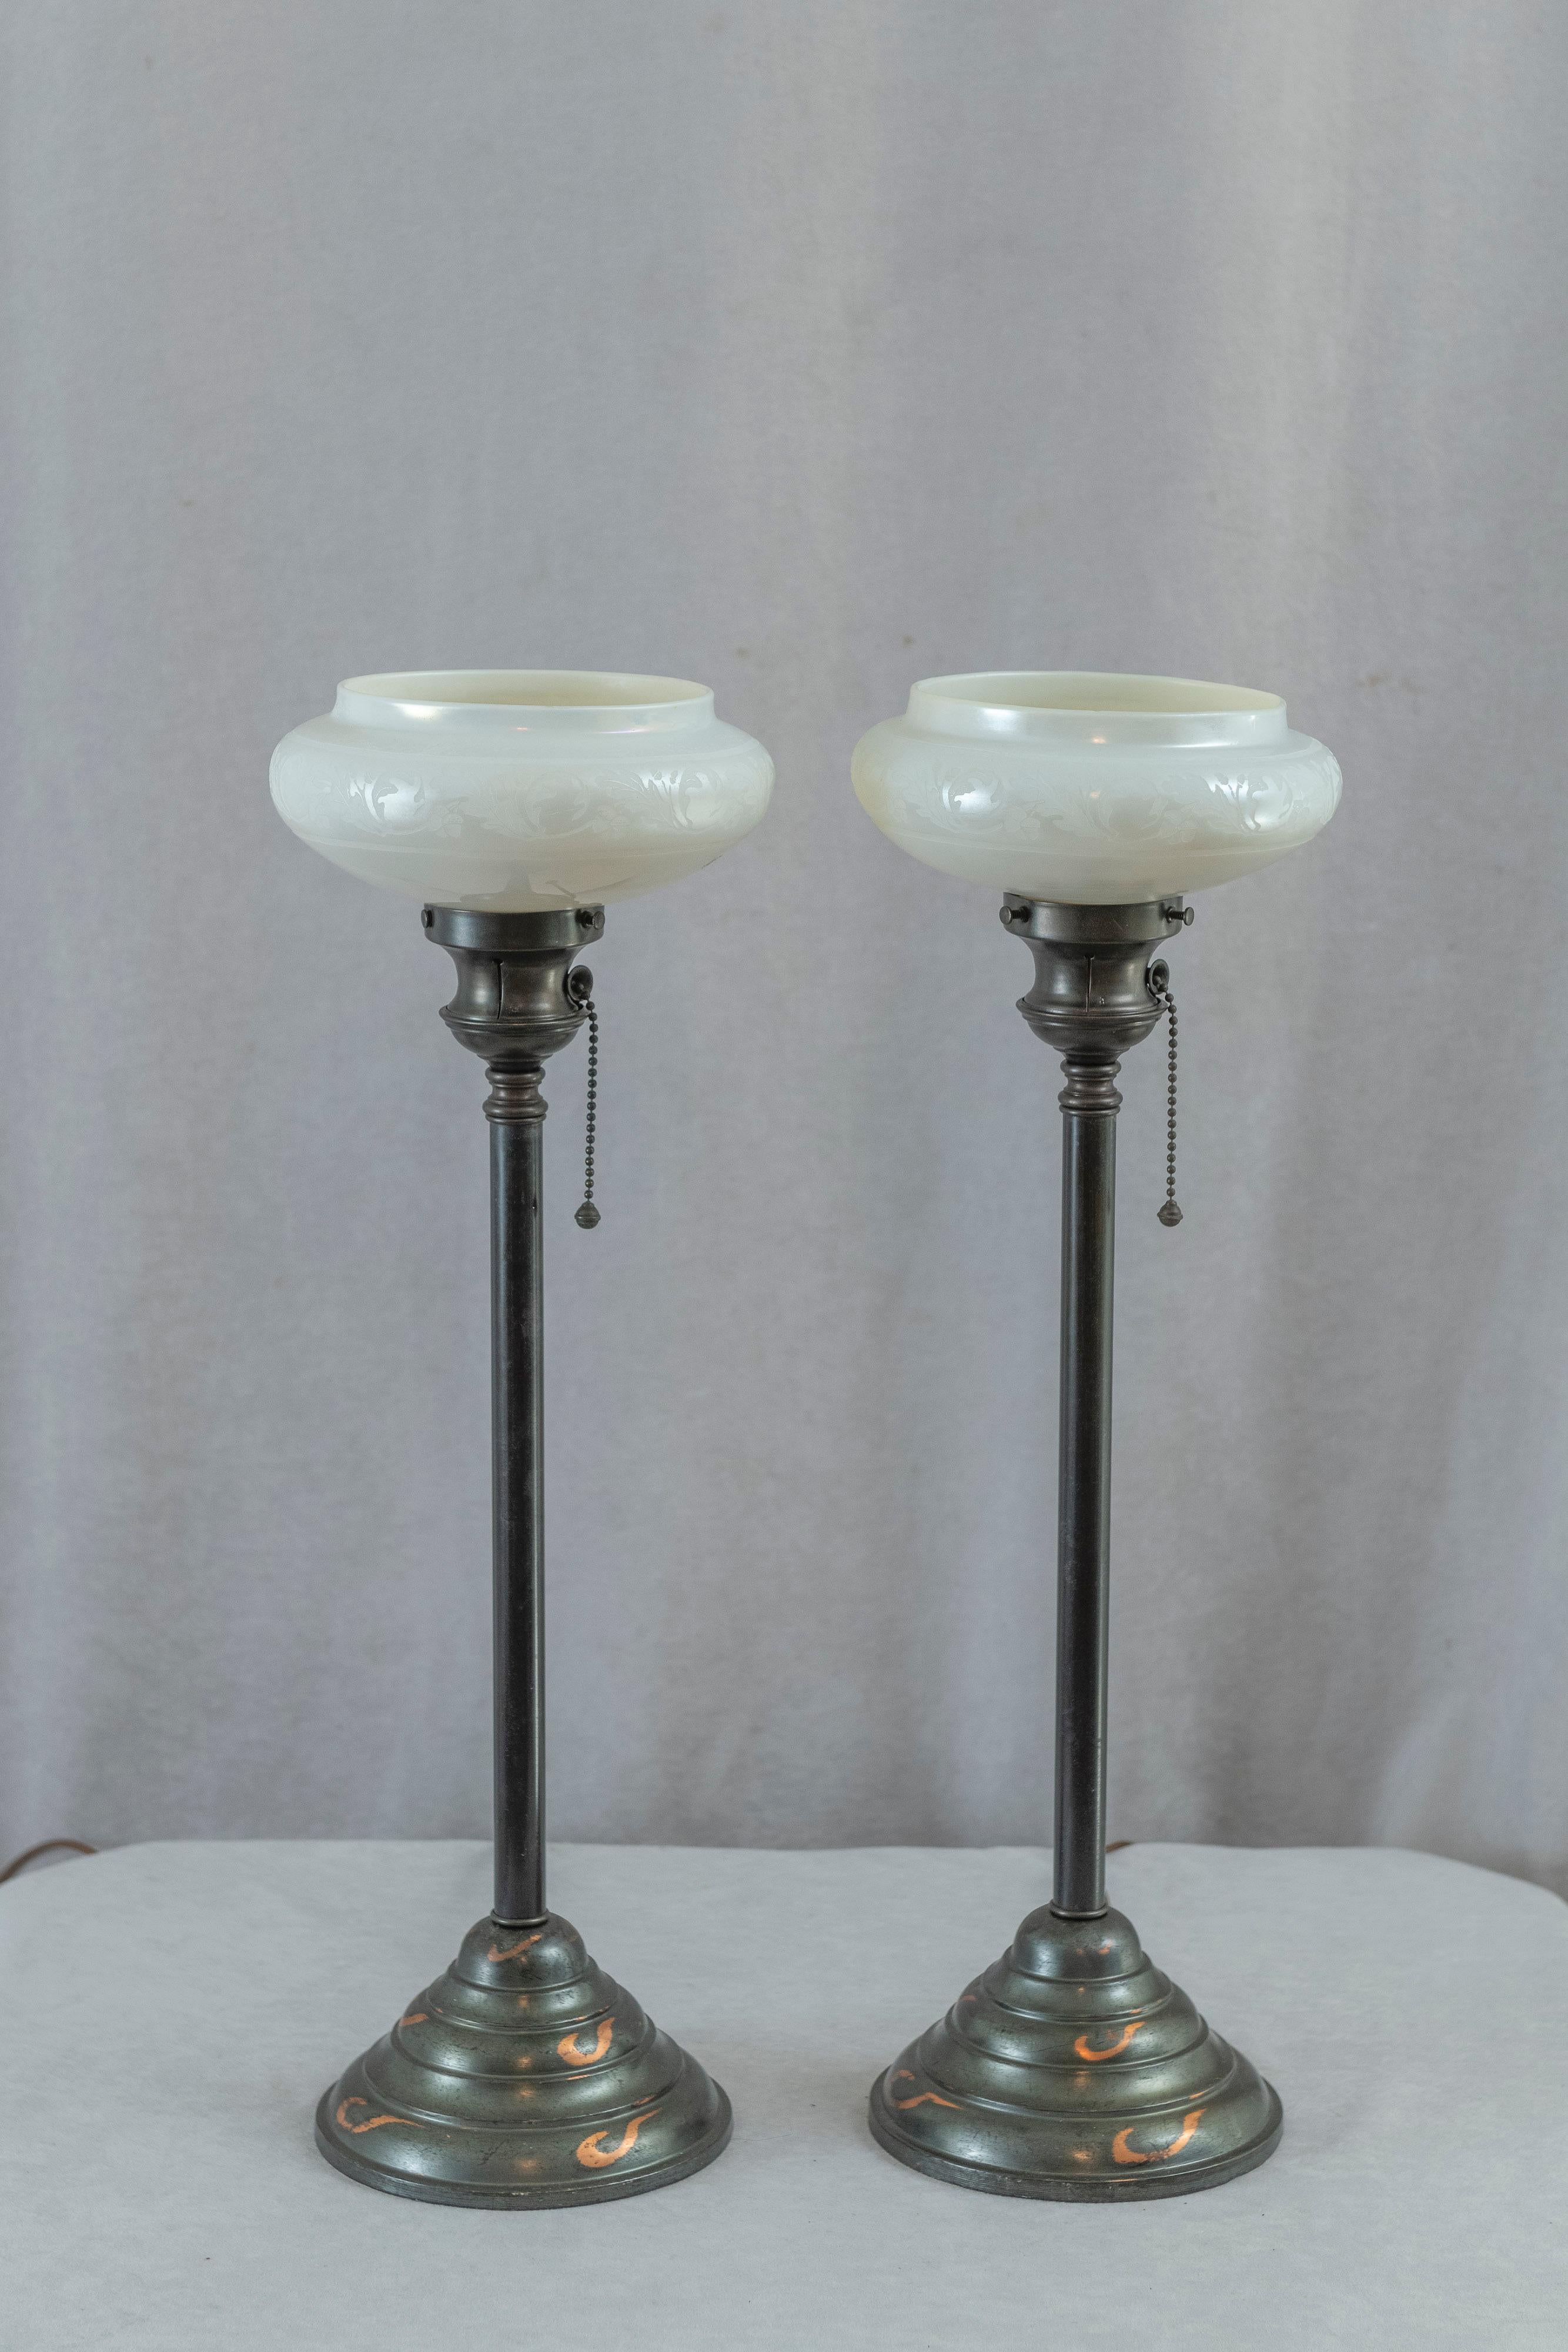  This very handsome pair of torchiere lamps consist of richly factory patinated bronze bases and hand blown glass by the noted maker, Steuben. The glass is what is termed 